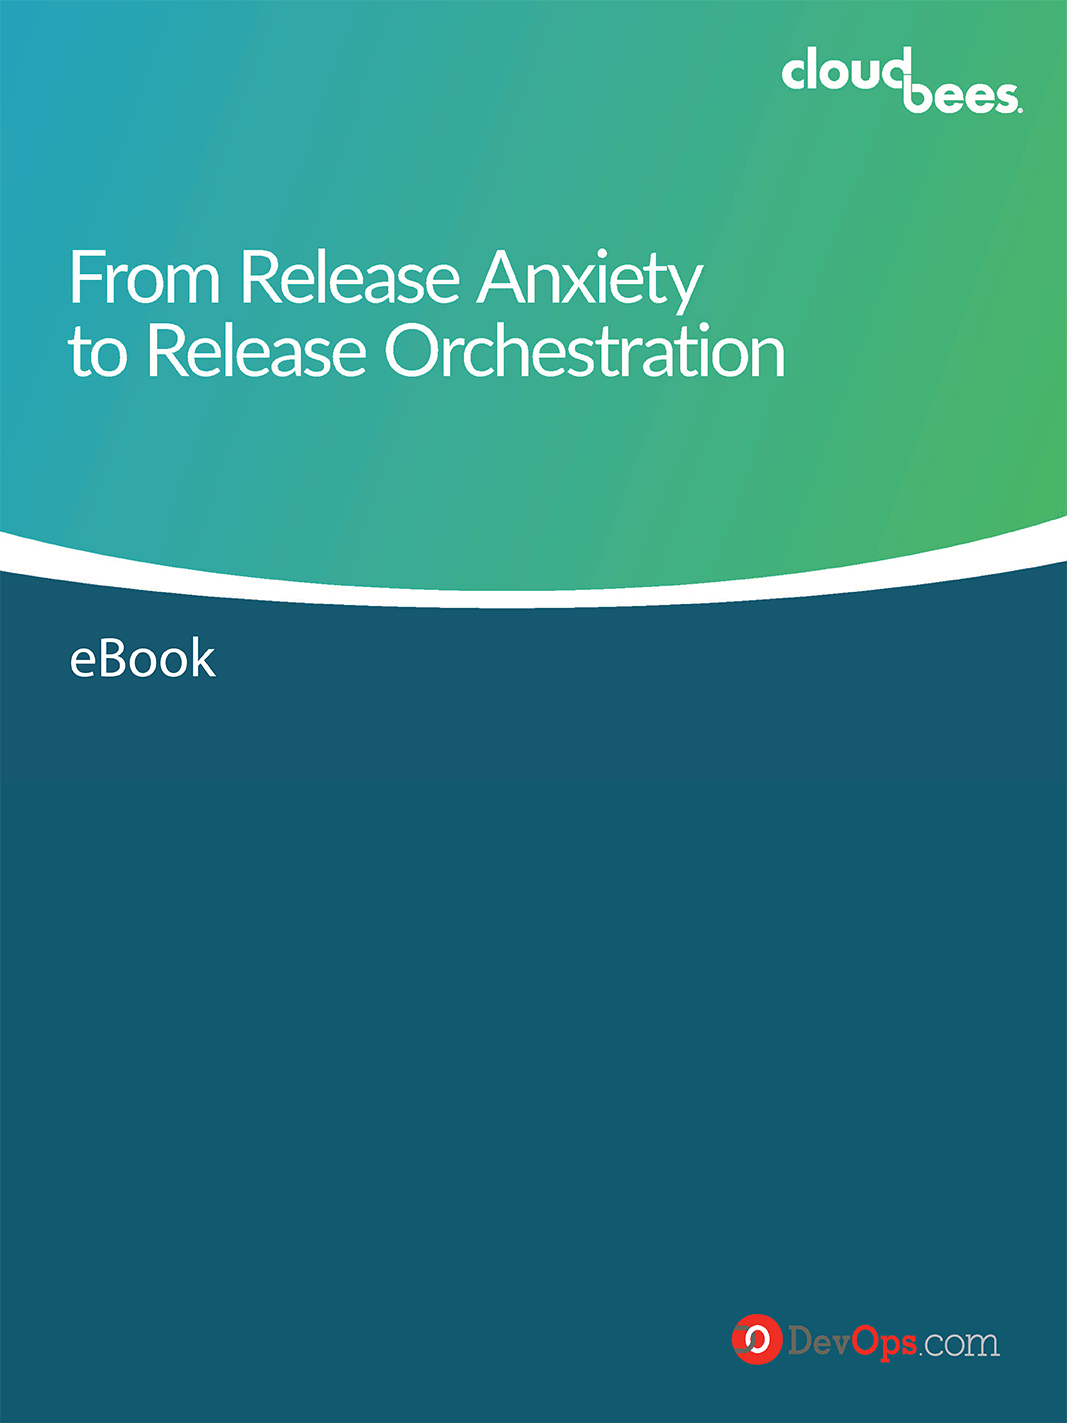 from-release-anxiety-to-release-orchestration_